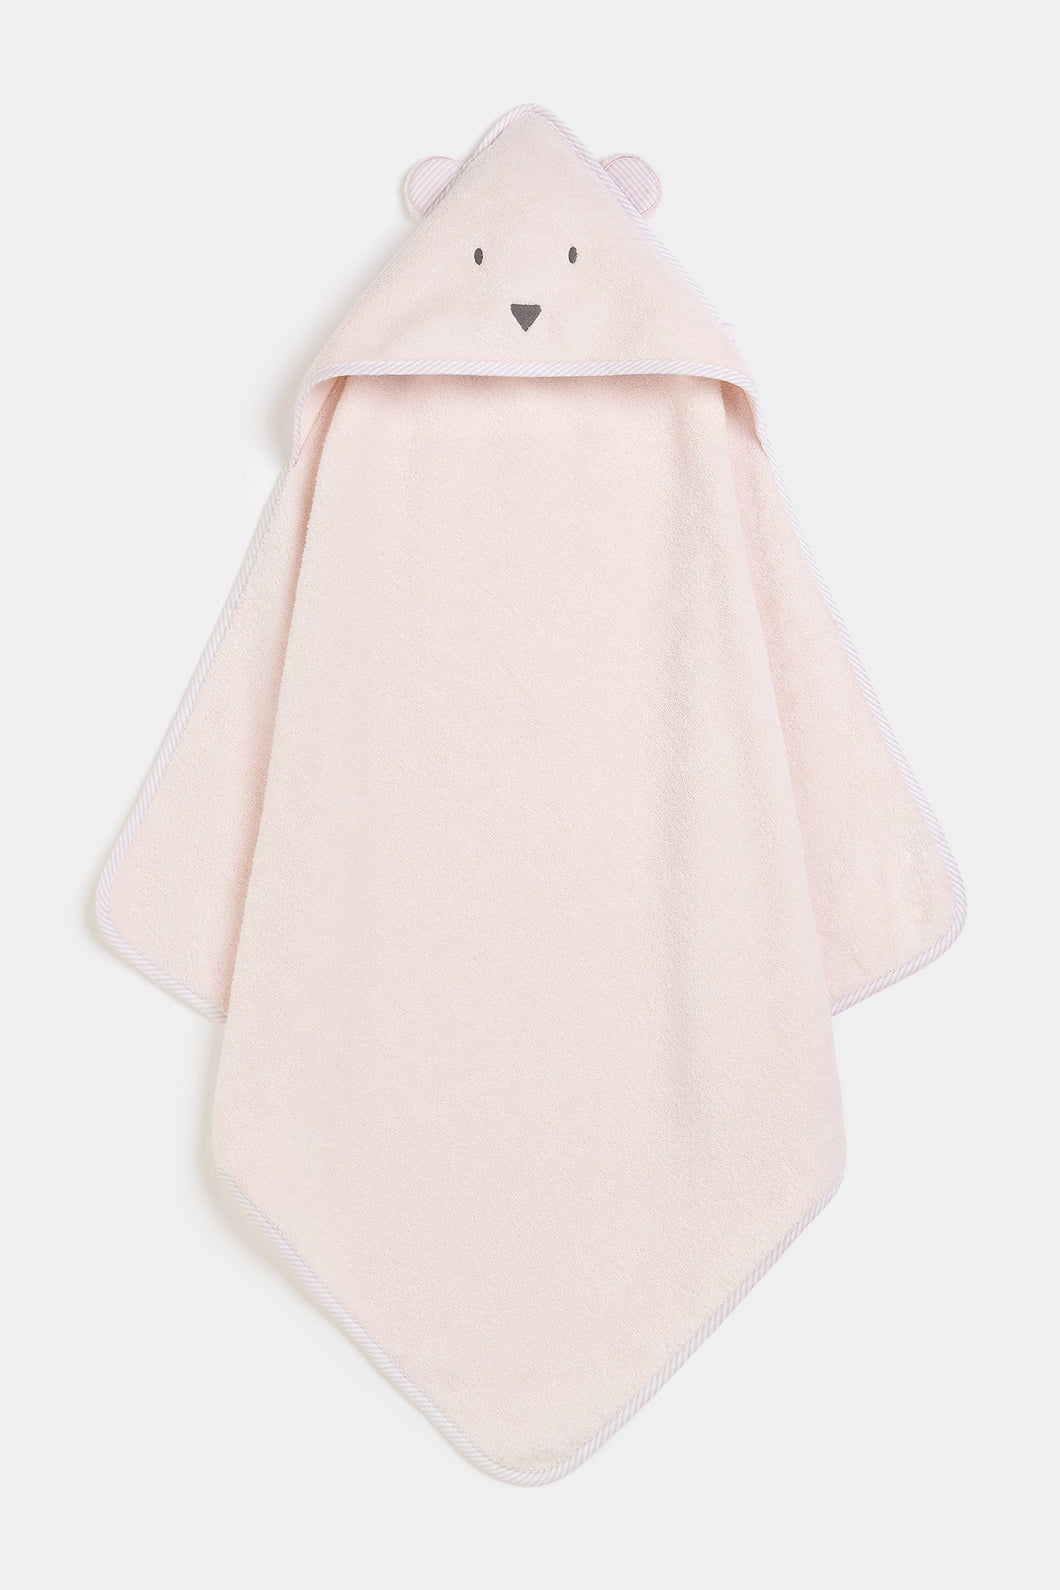 FREE GIFT - Mothercare Premium Cuddle And Dry Hooded Towel - Pink (Worth $180)